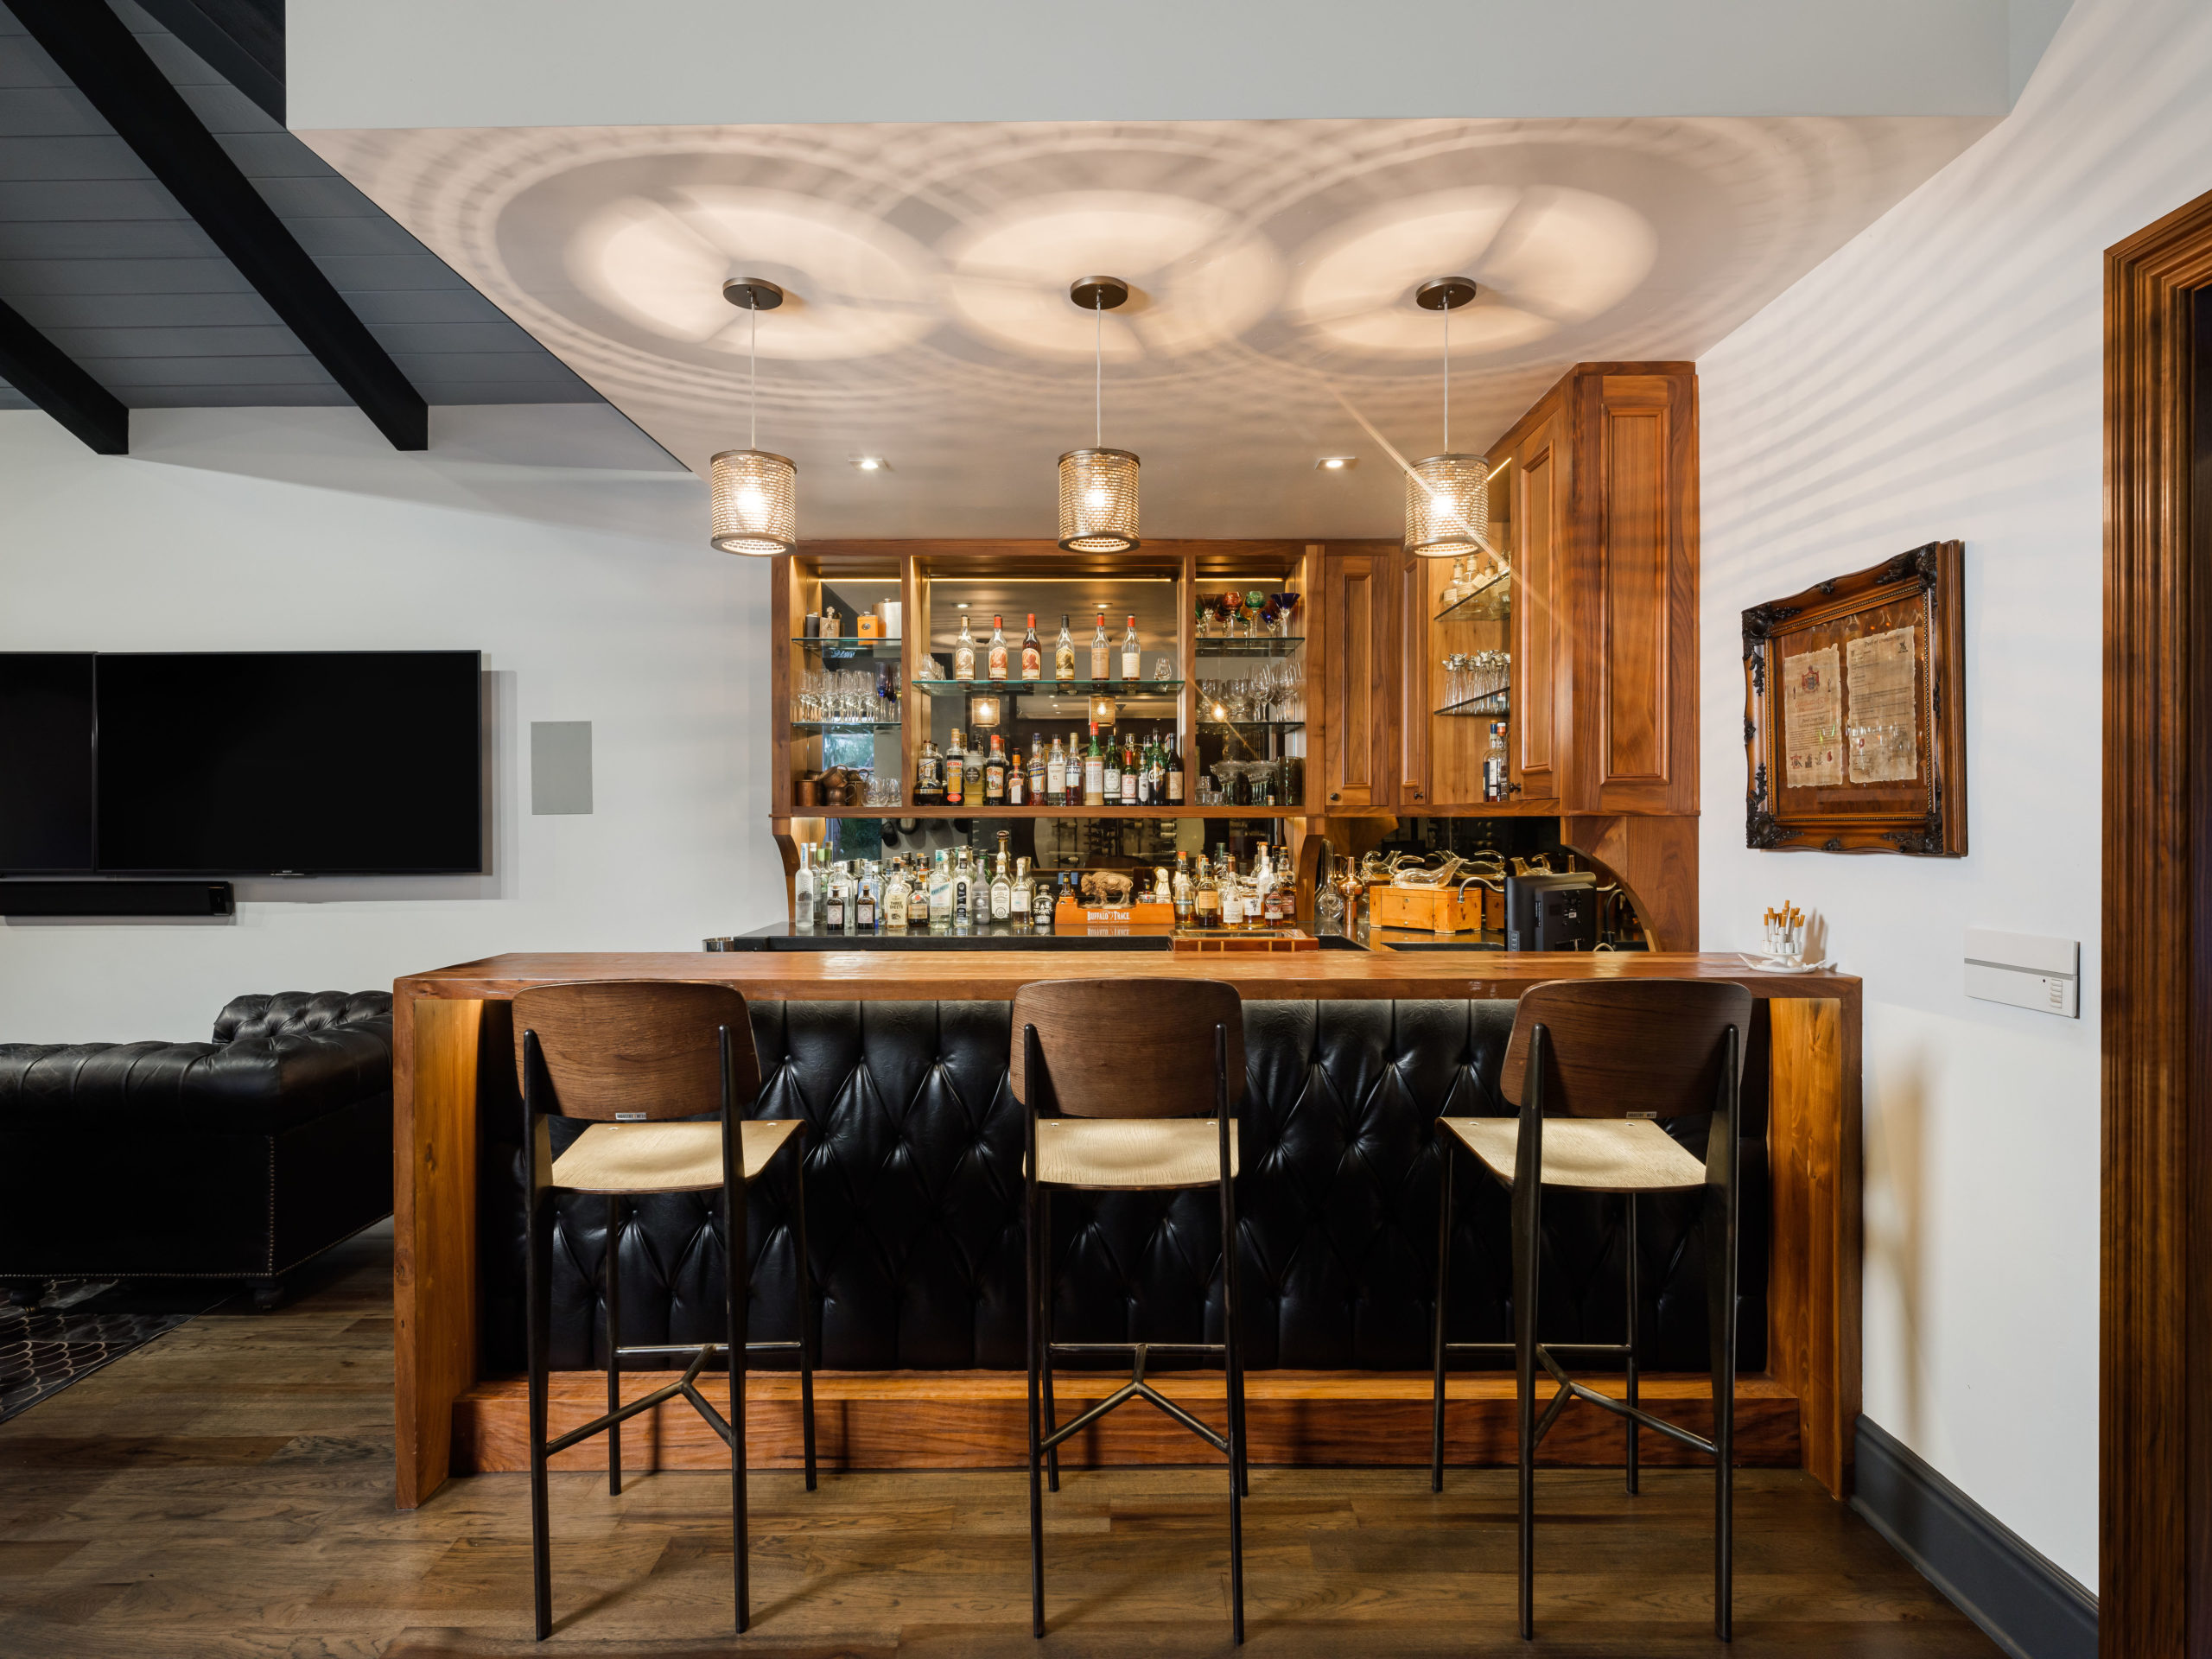 leather bar and barstools with hanging pendants